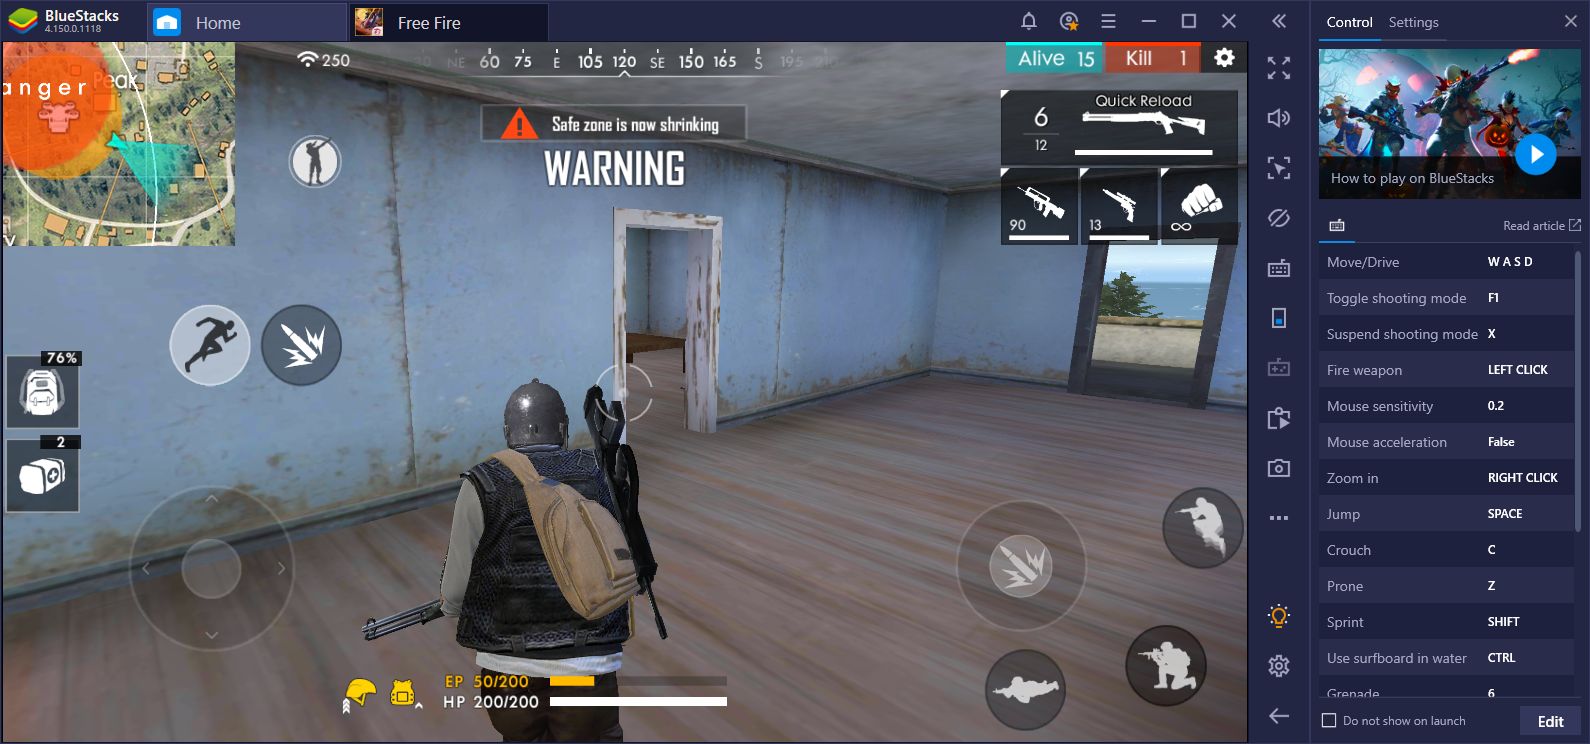 Garena Free Fire on PC - Outmatch the Competition with BlueStacks